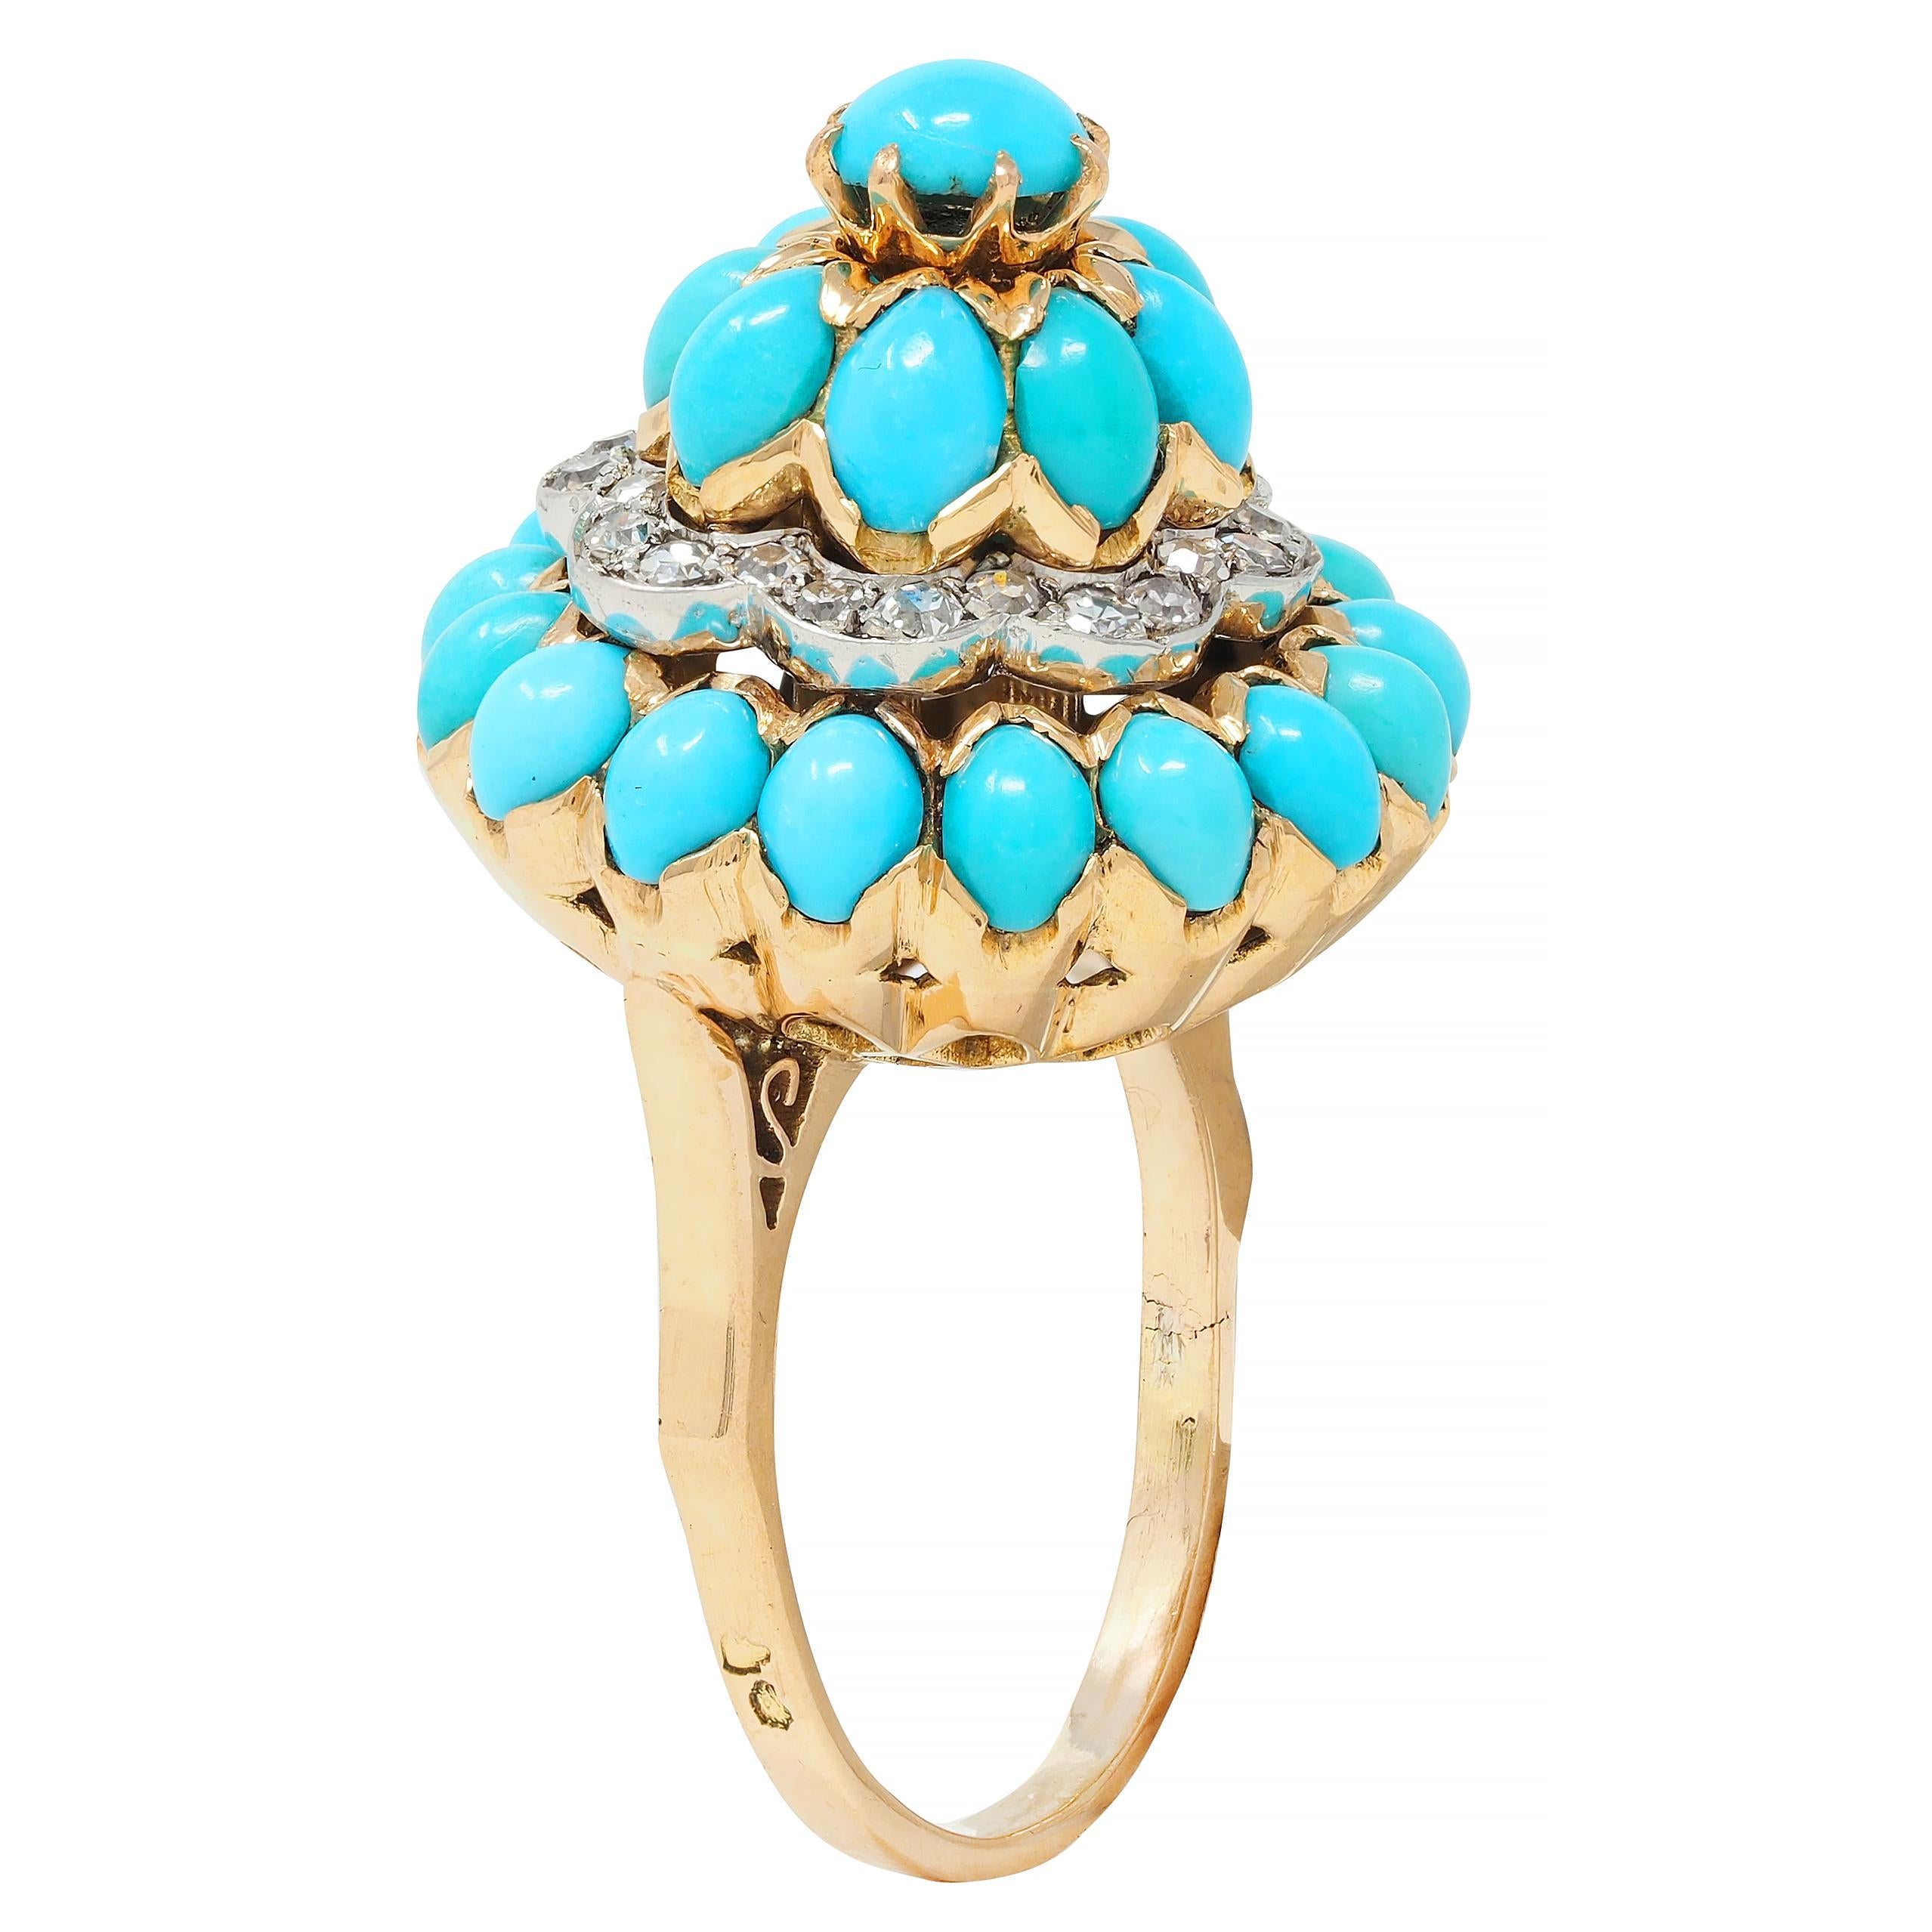 Designed as birthday cake-style cluster comprised of tiered radial rows of turquoise
Round and marquise-shaped cabochons are opaque greenish blue to robin's egg blue
Ranging in size from 5.0 mm round to 3.0 x 4.5 mm - prong set 
Featuring one